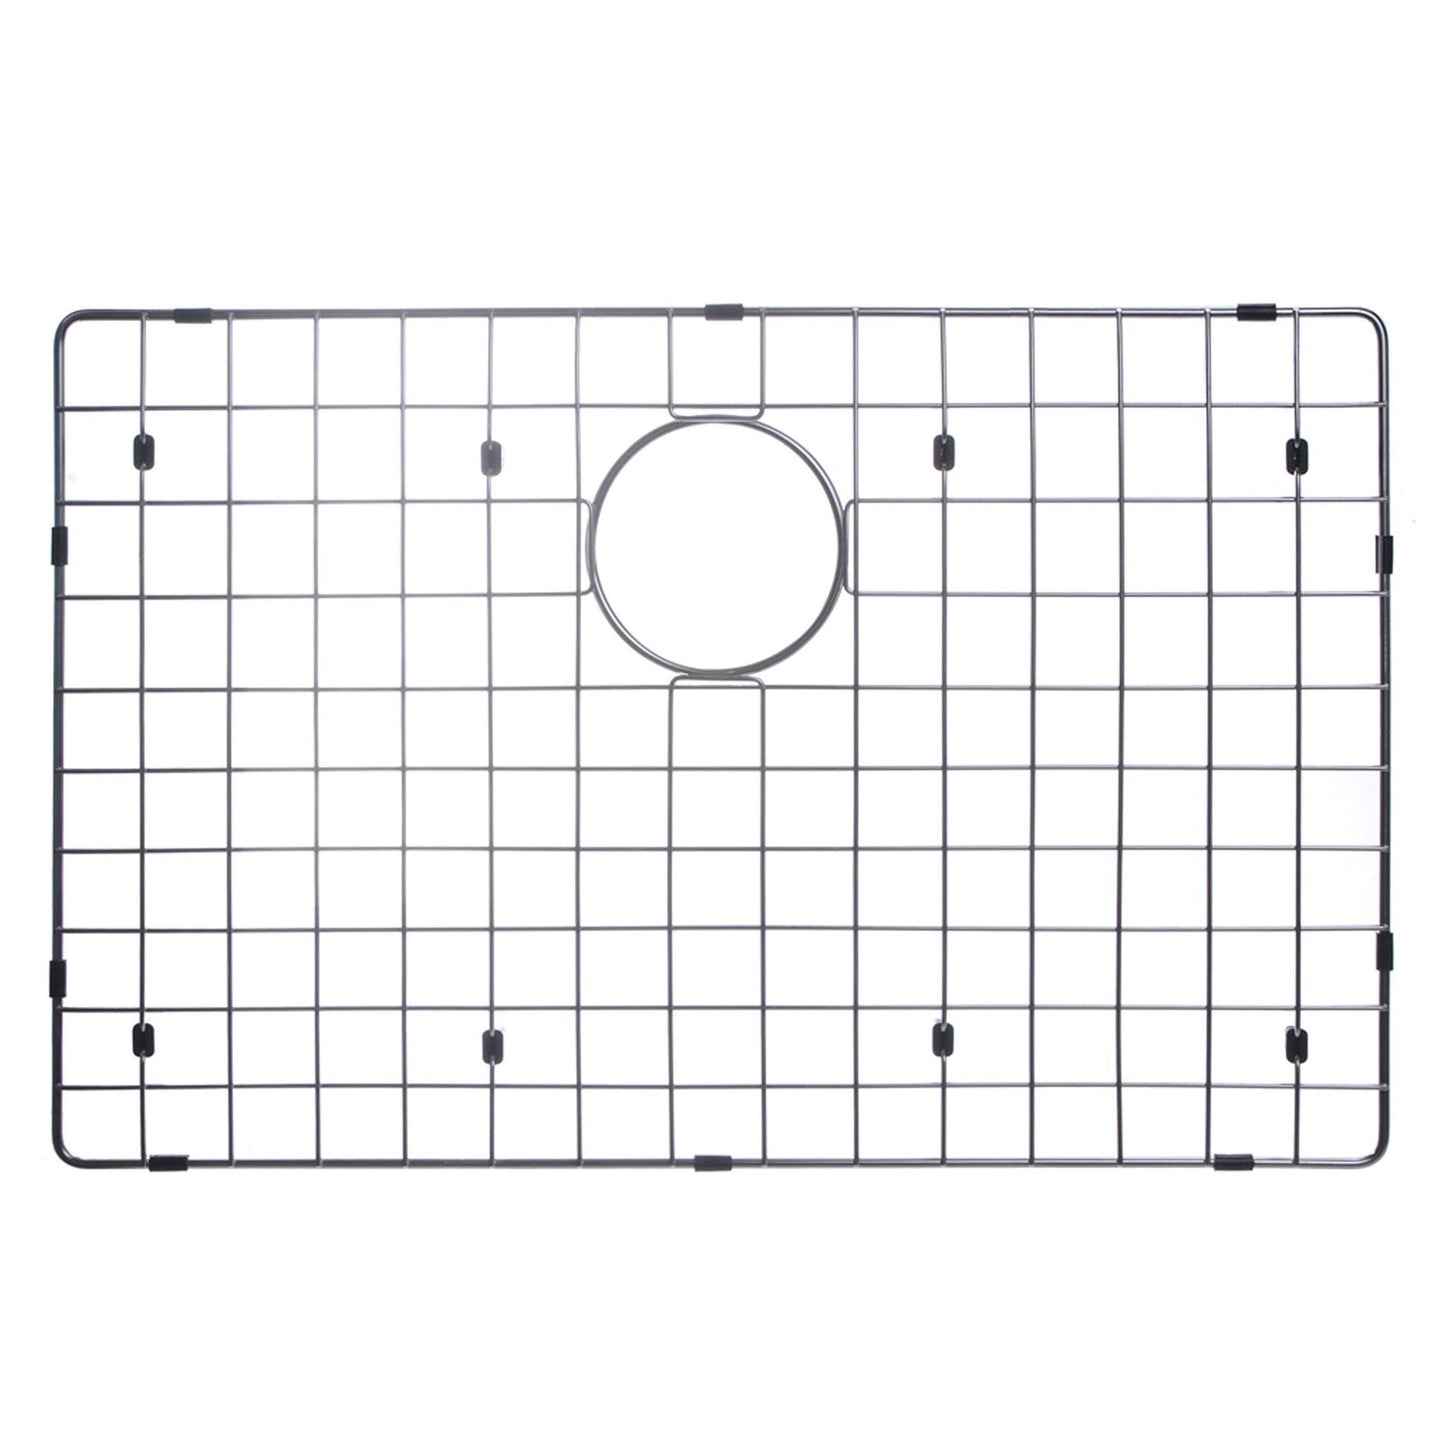 Water Creation Corner Radius Single Bowl Stainless Steel Hand Made Apron Front 30 Inch X 22 Inch Sink With Drain, Strainer, And Bottom Grid